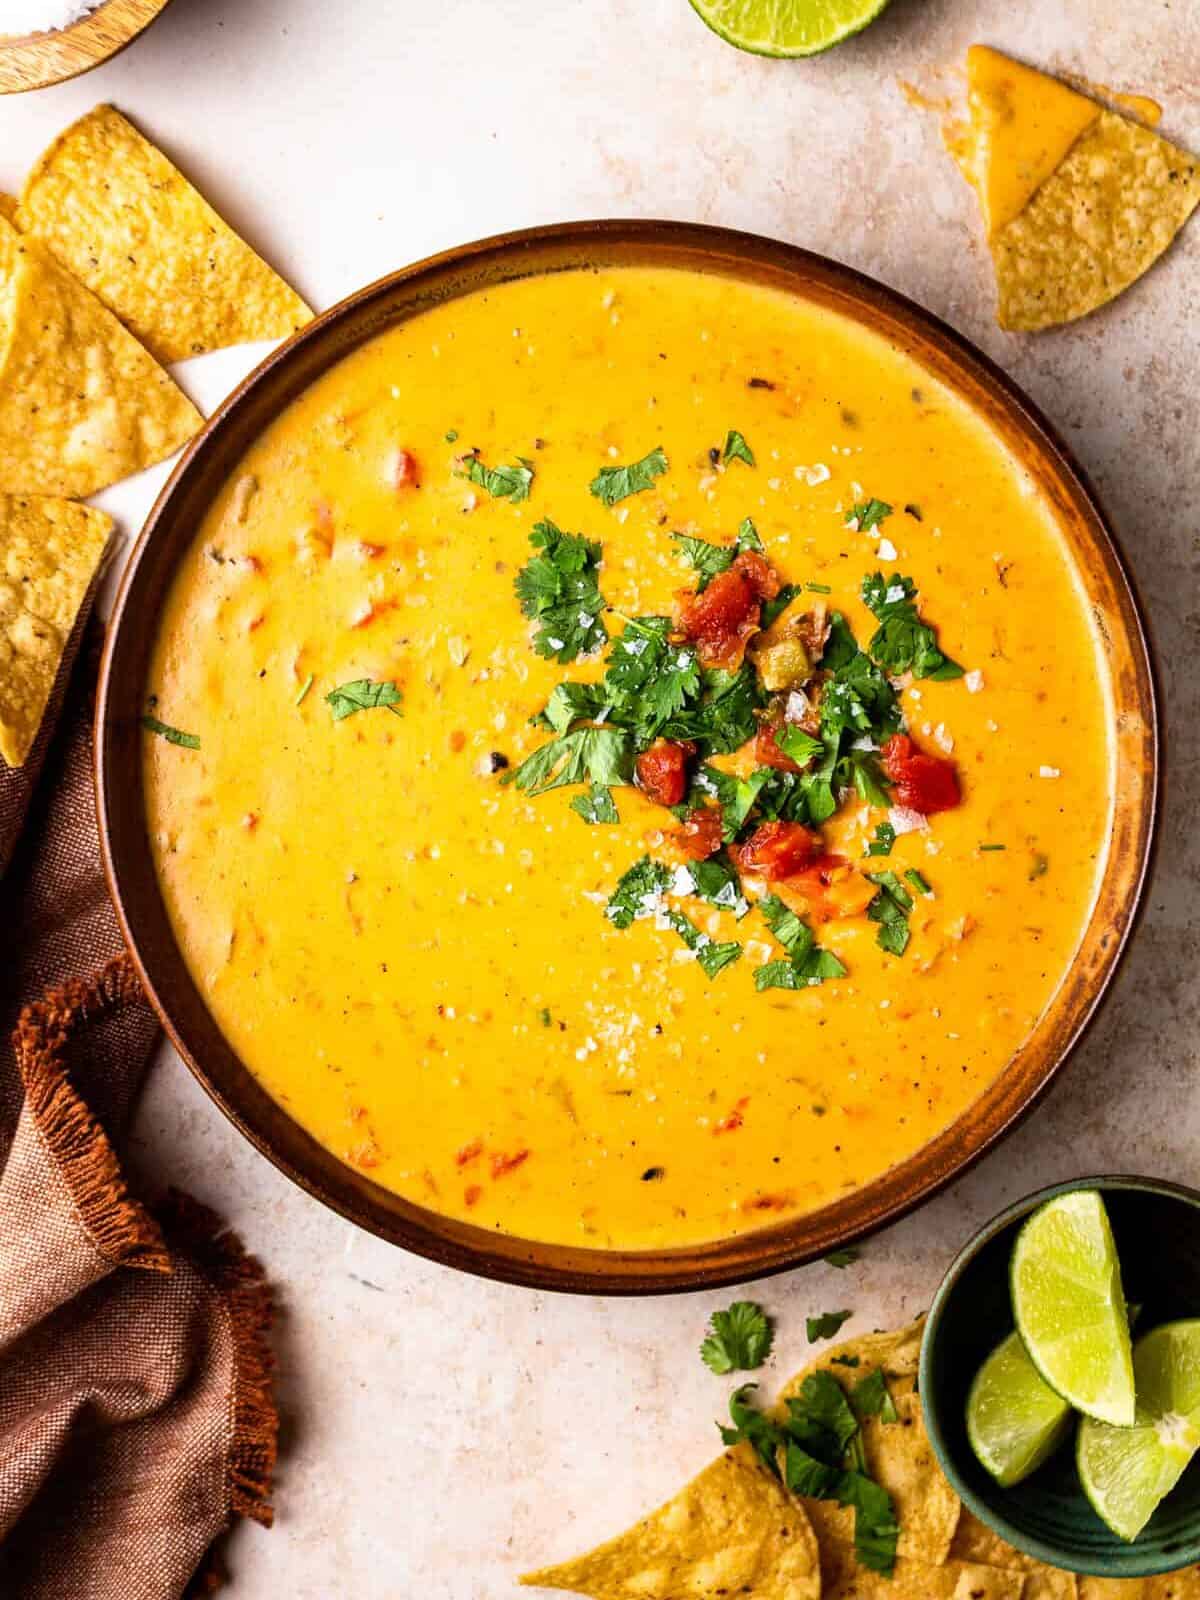 overhead view of a bowl of crockpot queso cheese dip garnished with tomatoes and cilantro, with scattered tortilla chips laid around it